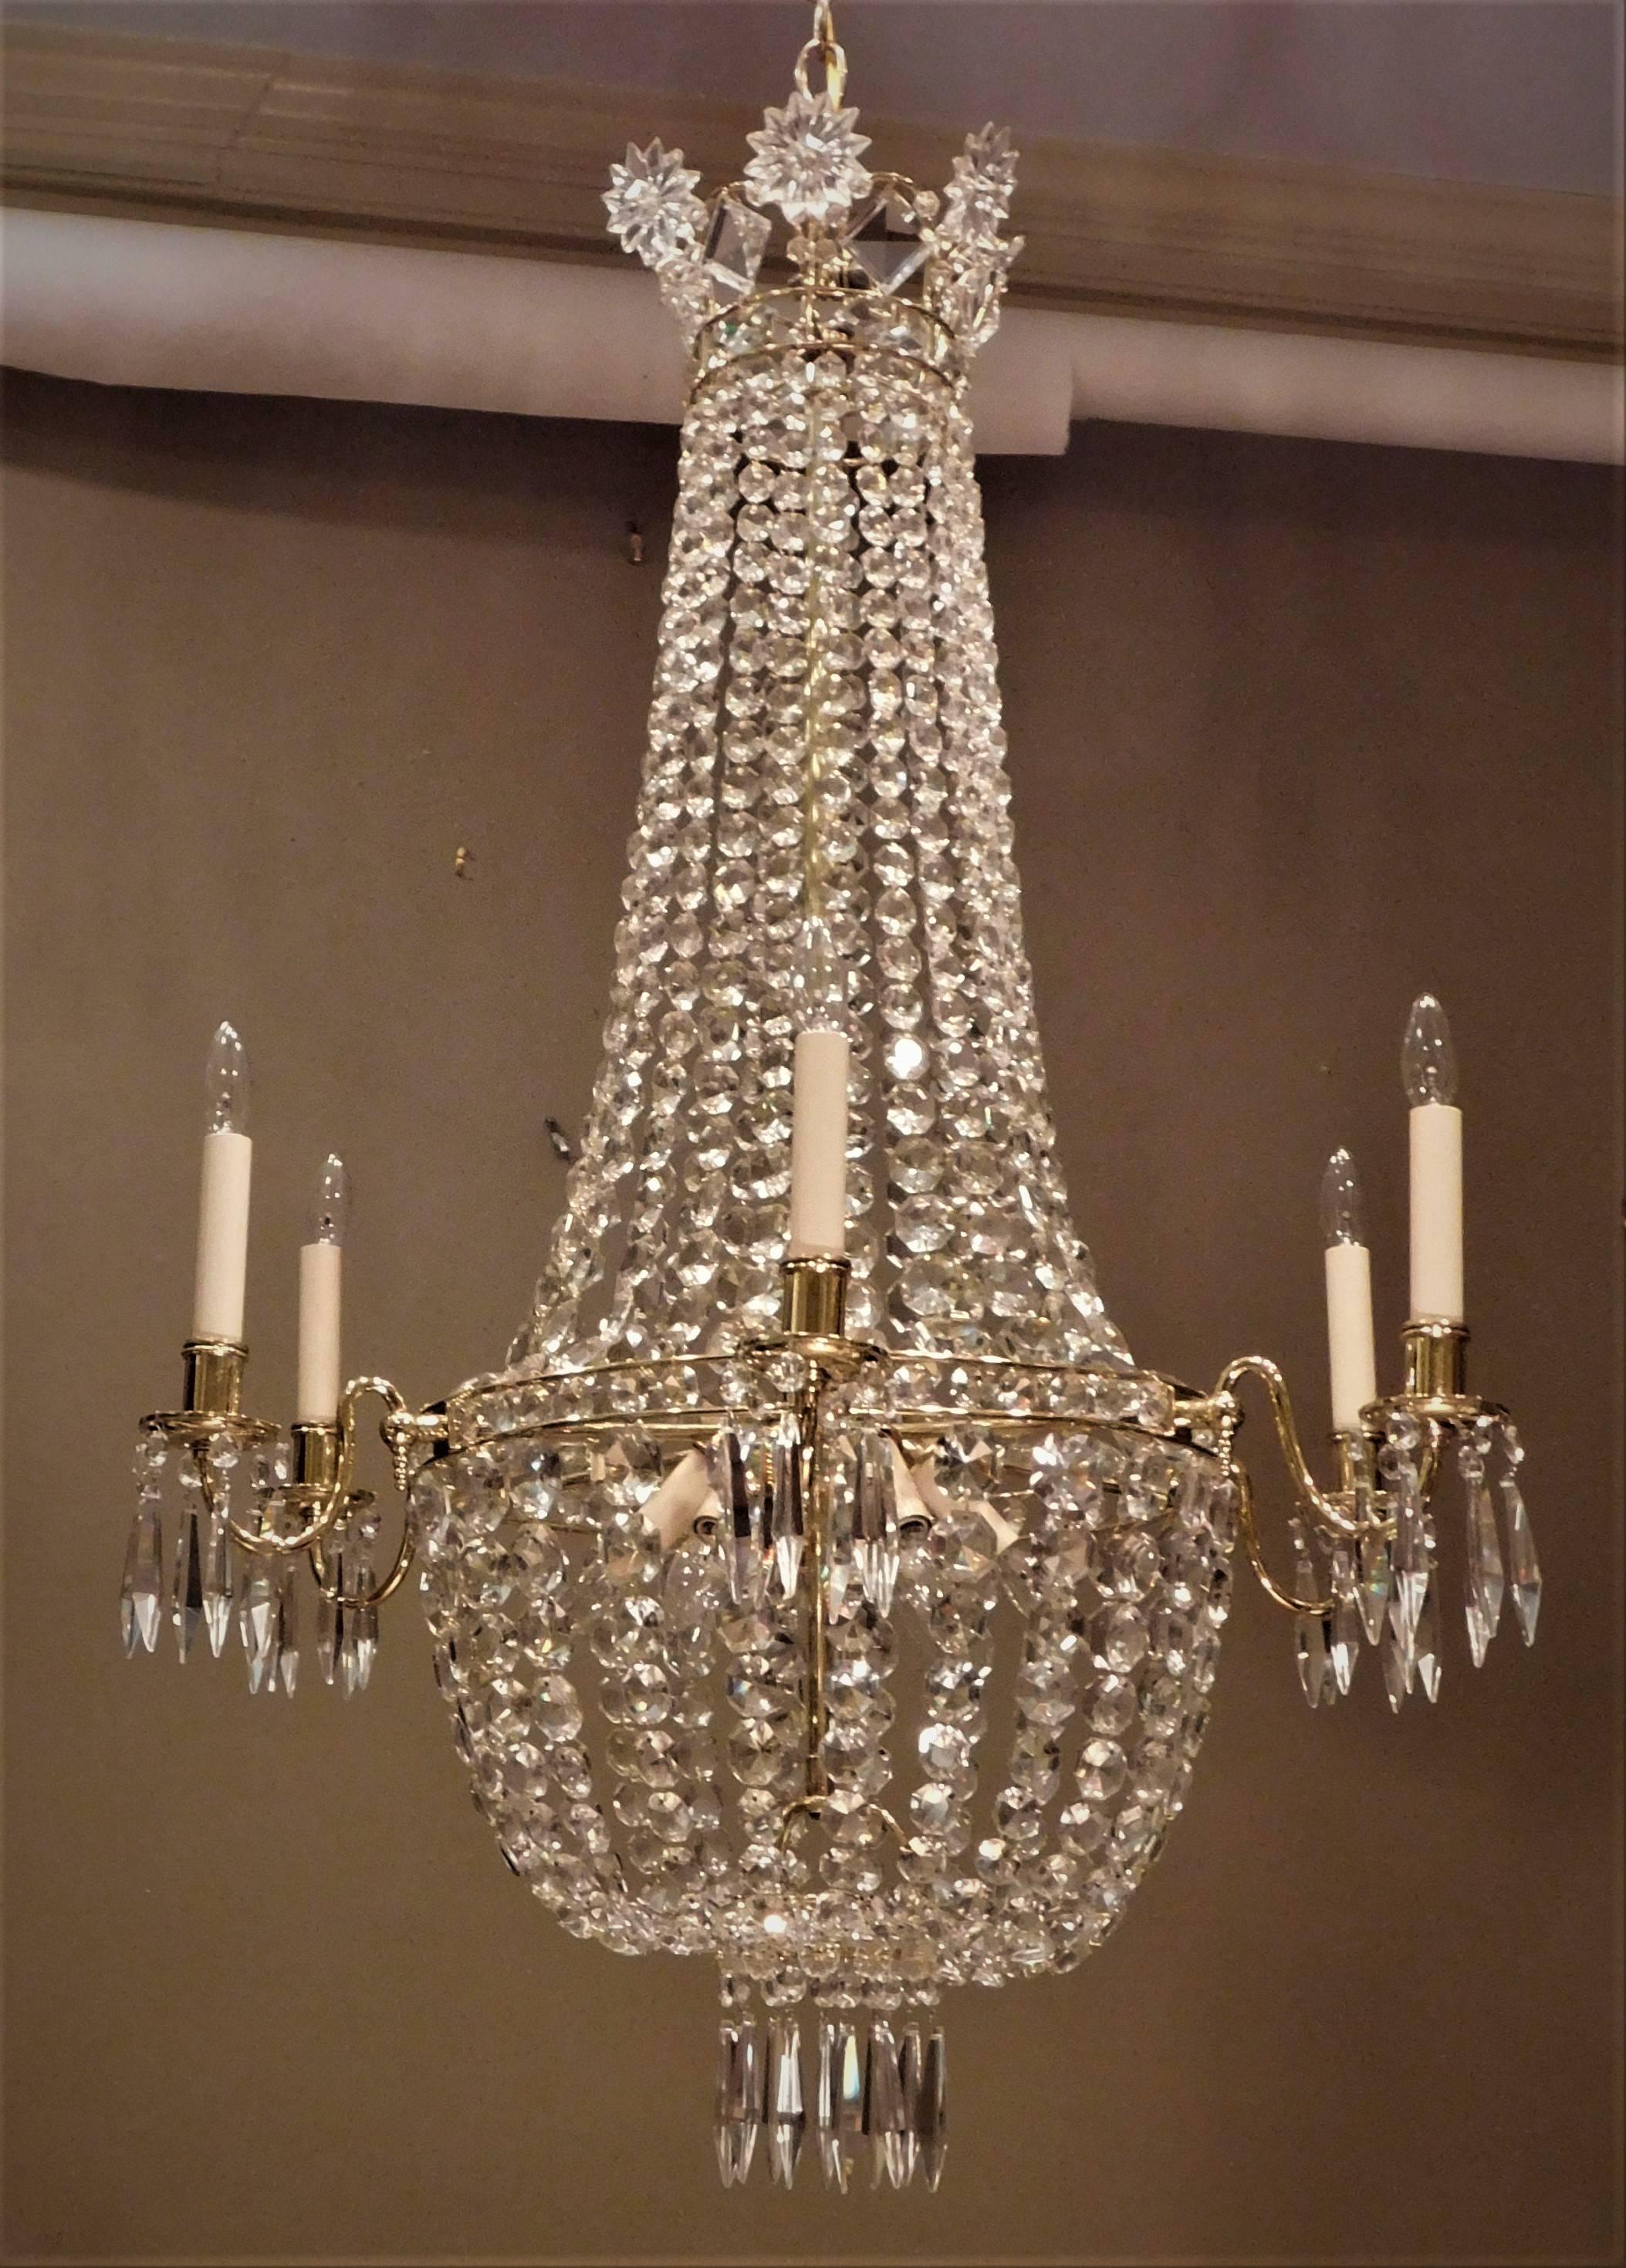 Solid brass frame with English cut crystal. Six lights arms on outside ring and a cluster of six lights inside, giving a large amount of light and dramatic glow. Crystal star crown is quite distinctive. Ceiling cap, hanging hardware, and 1' of chain